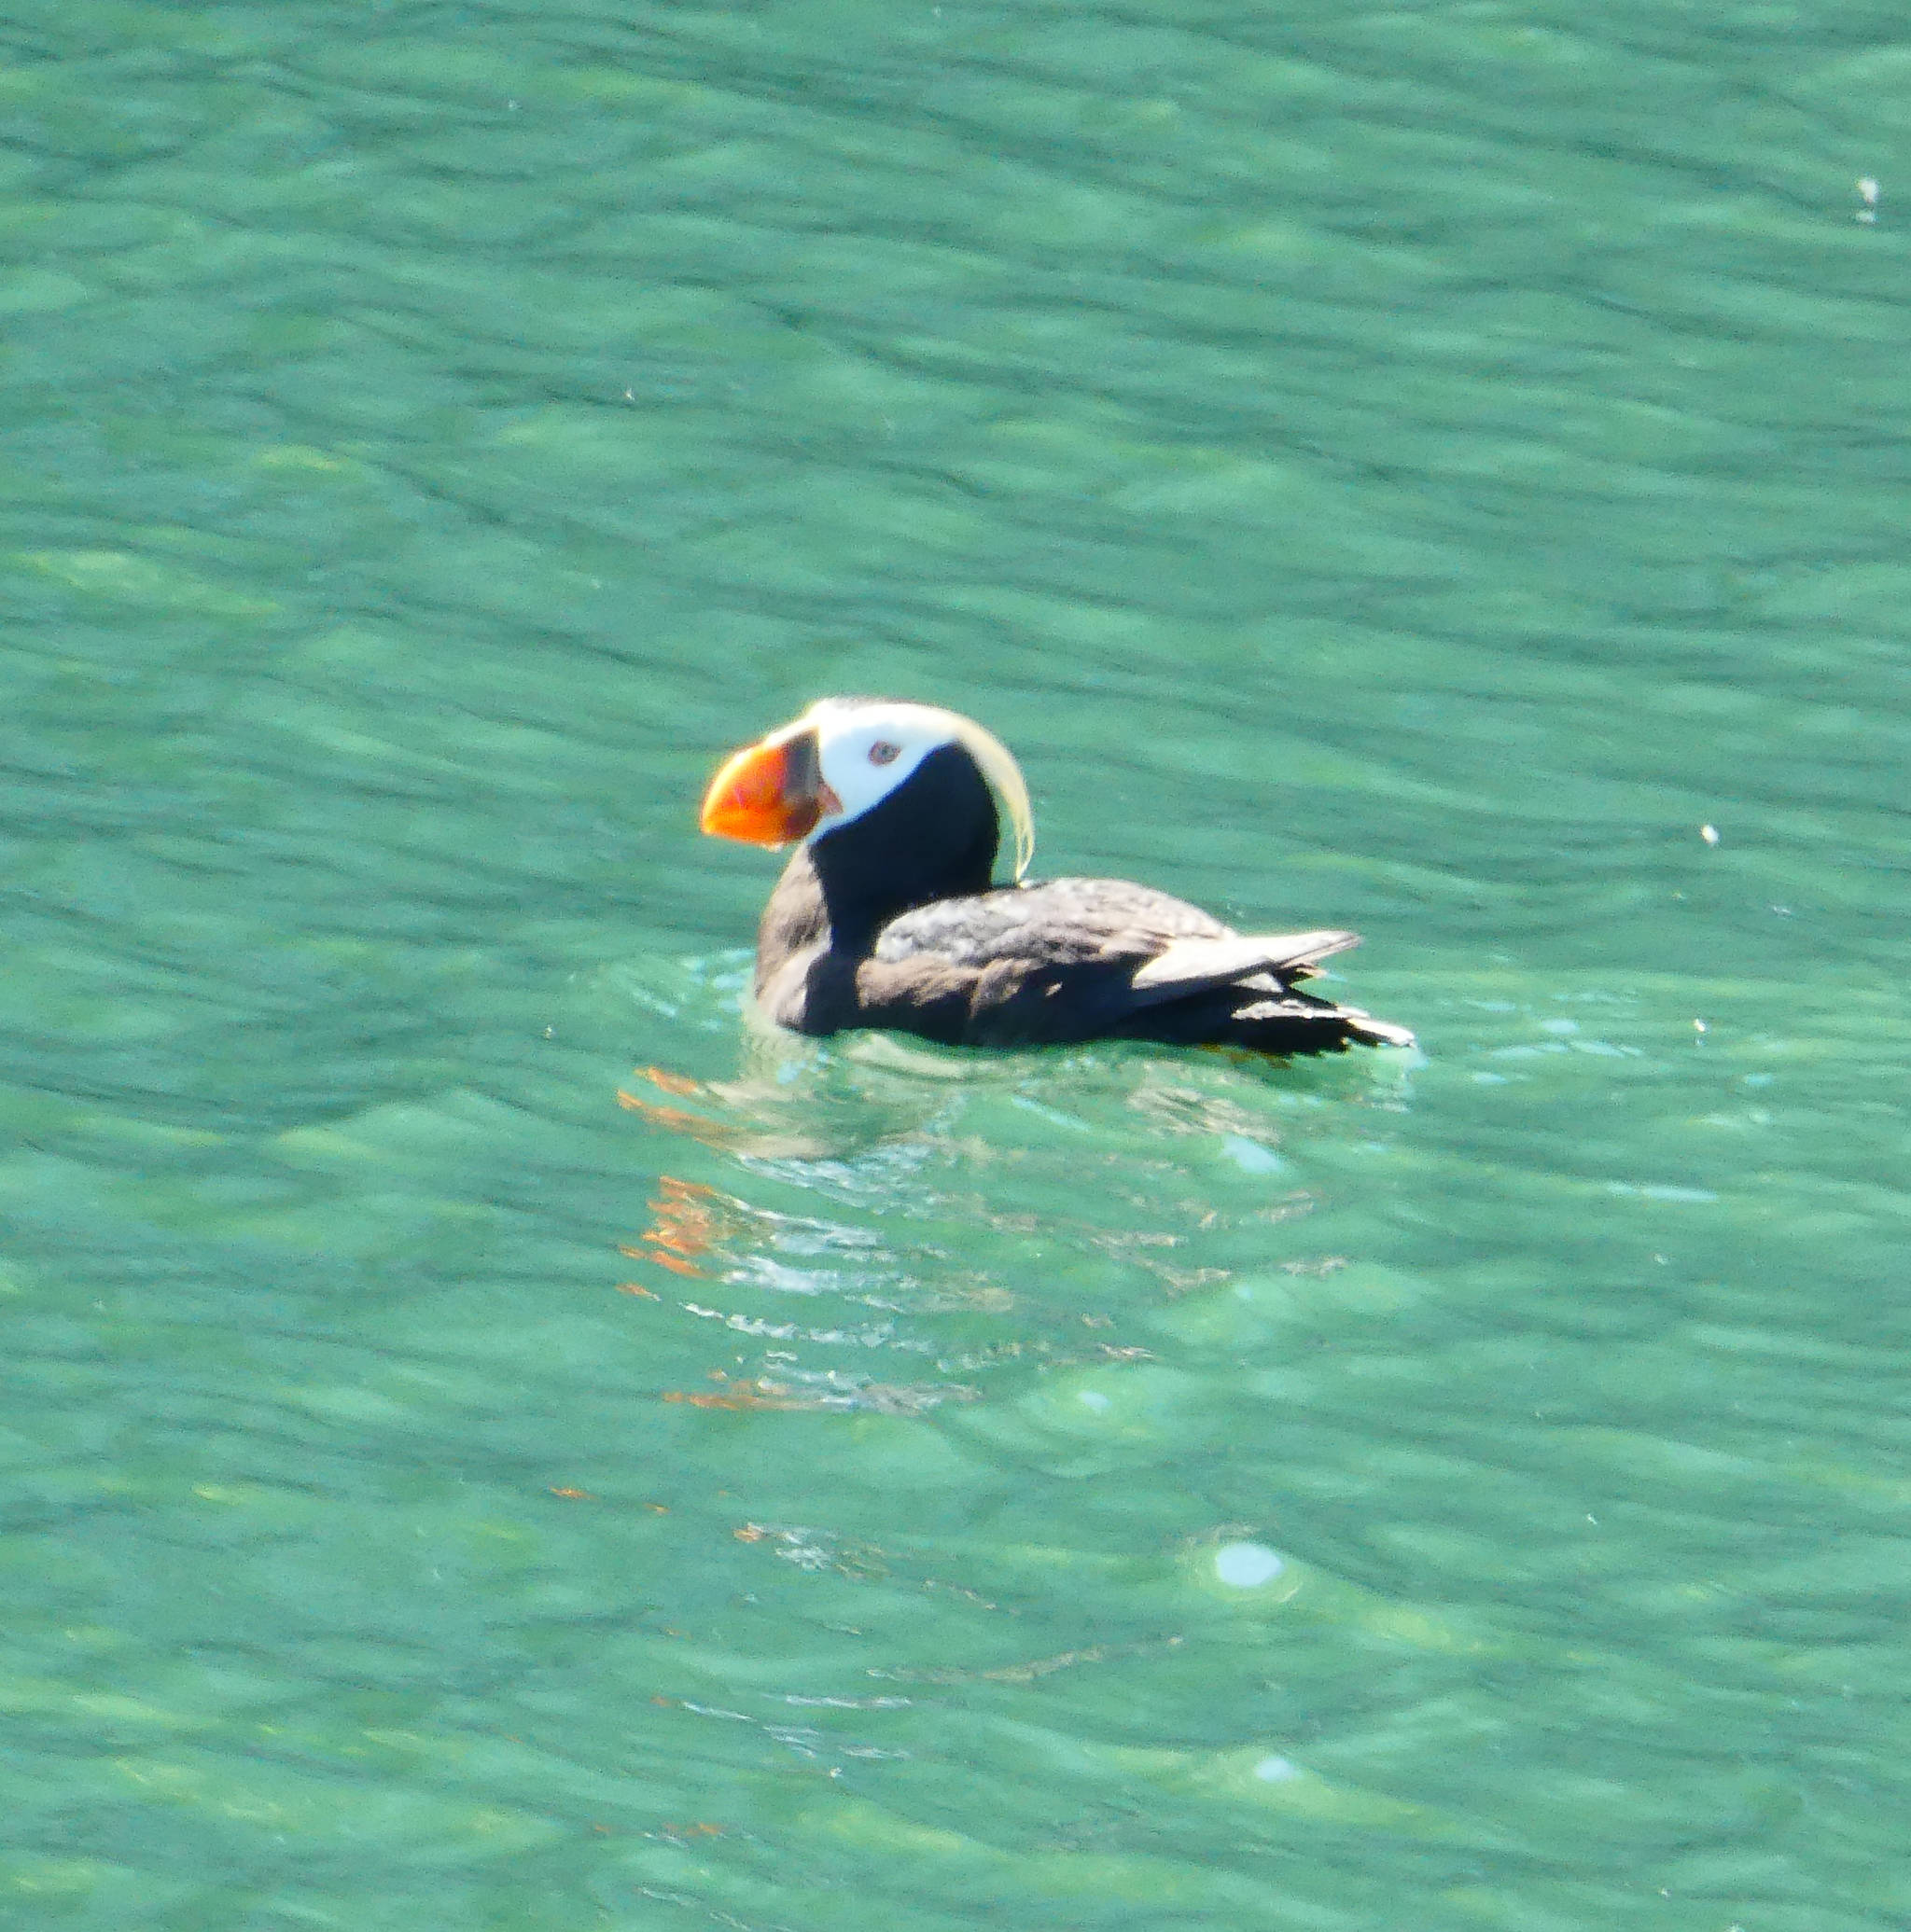 A tufted puffin near Marble Island on July 23. (Courtesy Photo / Denise Carroll)
A tufted puffin near Marble Island on July 23. (Courtesy Photo / Denise Carroll)